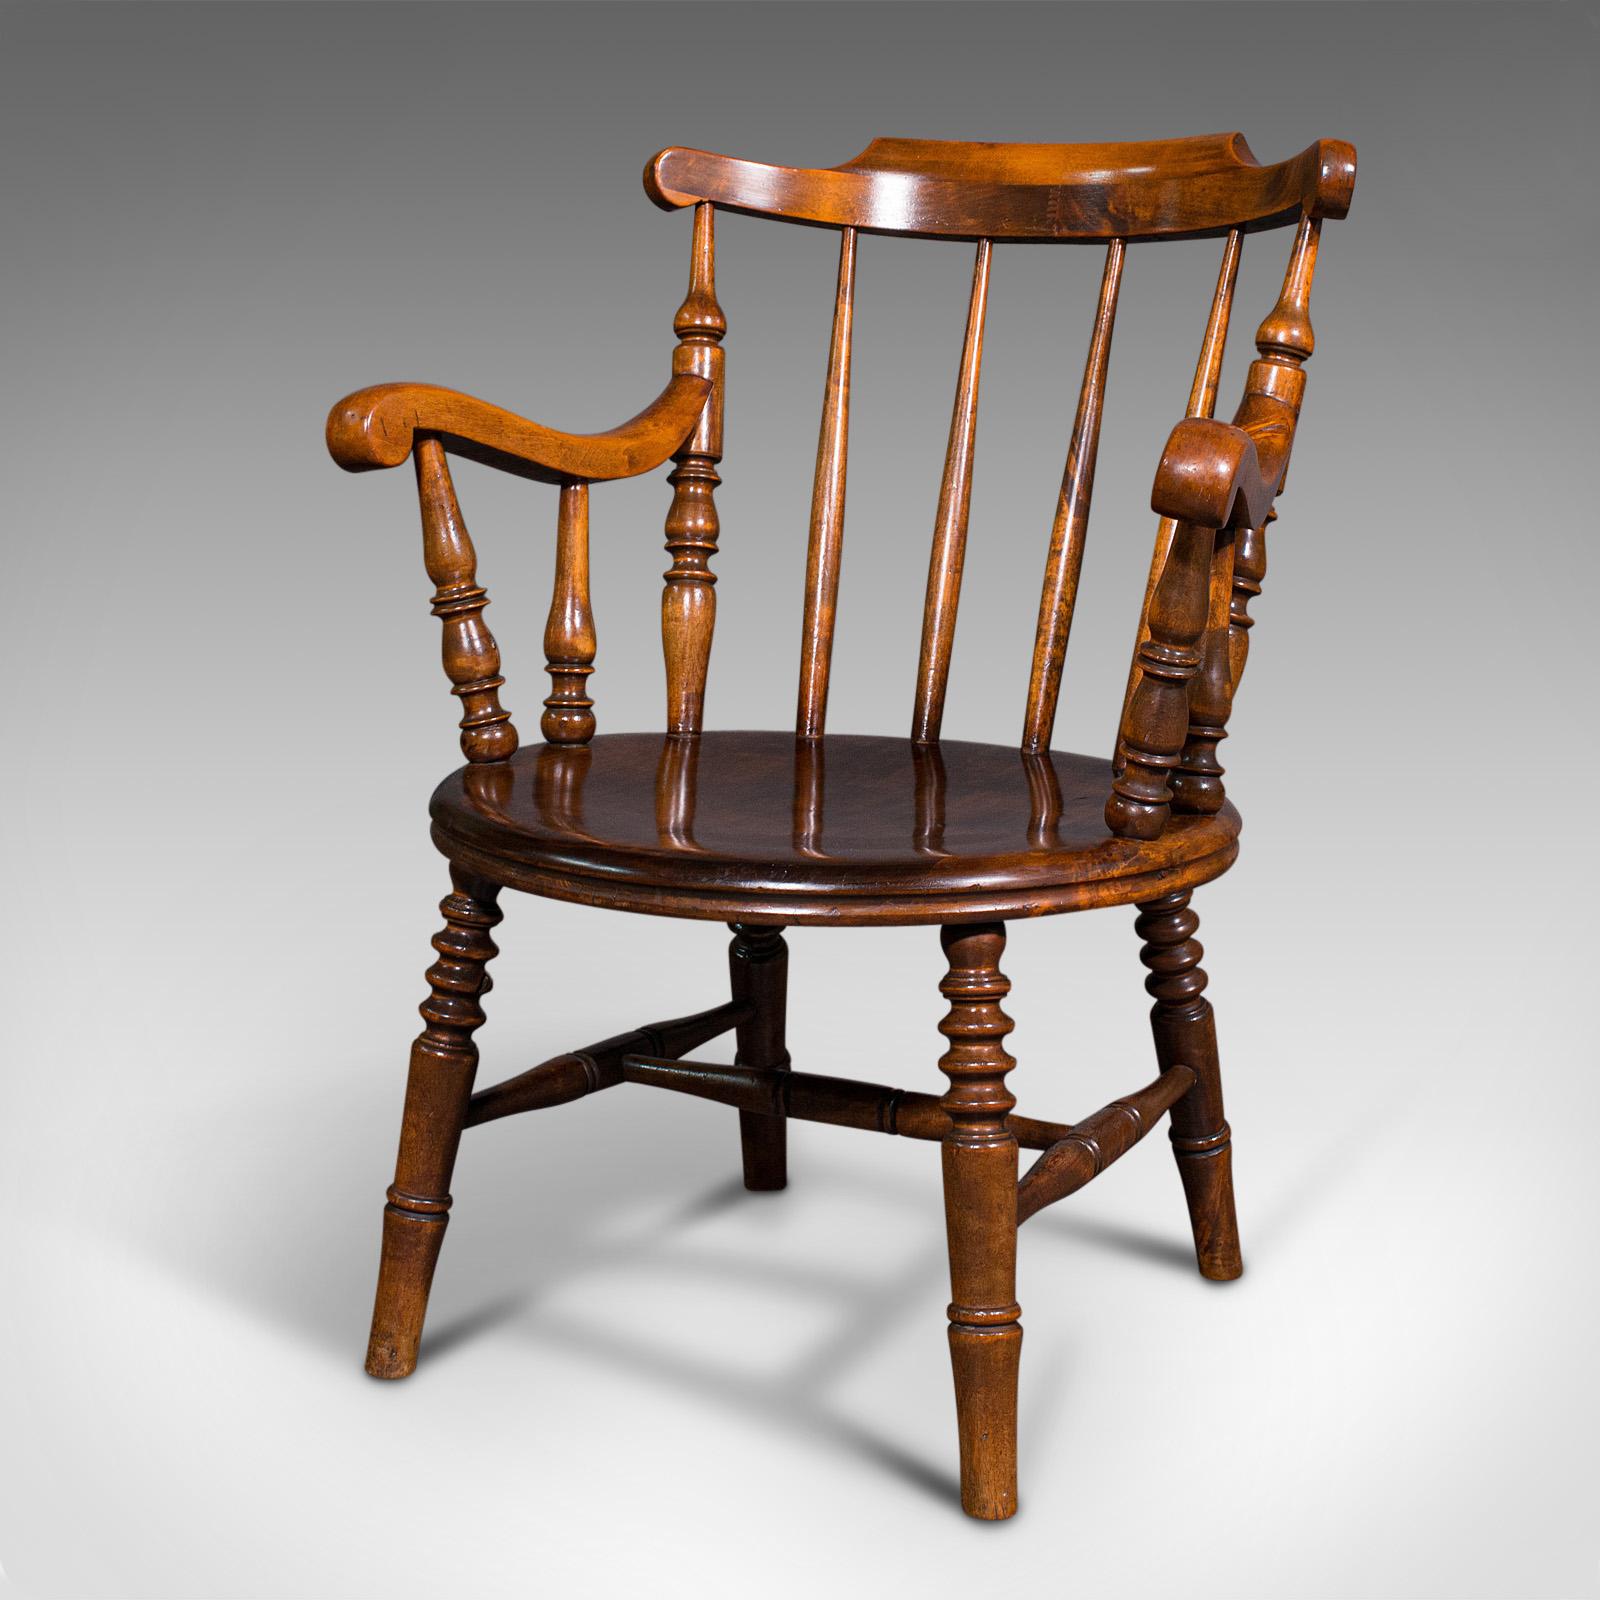 British Antique Fireside Elbow Chair, English, Beech, Occasional Seat, Victorian, C.1890 For Sale